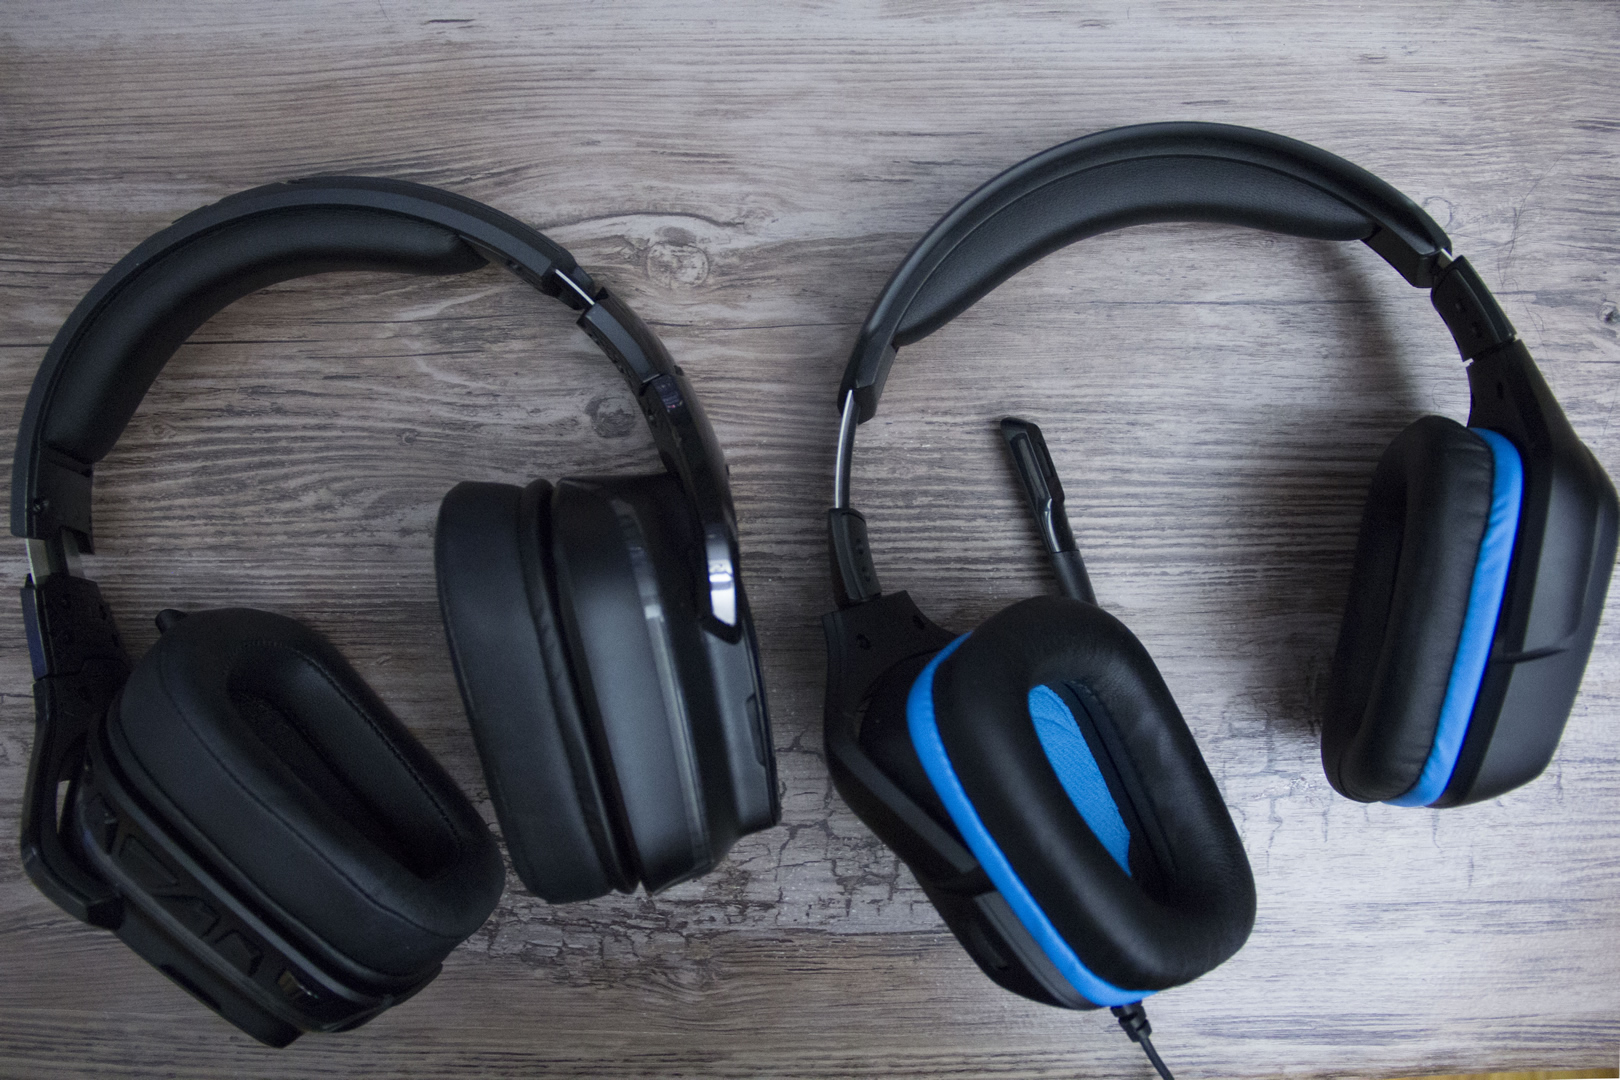 Logitech G935 and G432 Review: Great Gaming Headsets With Flaws